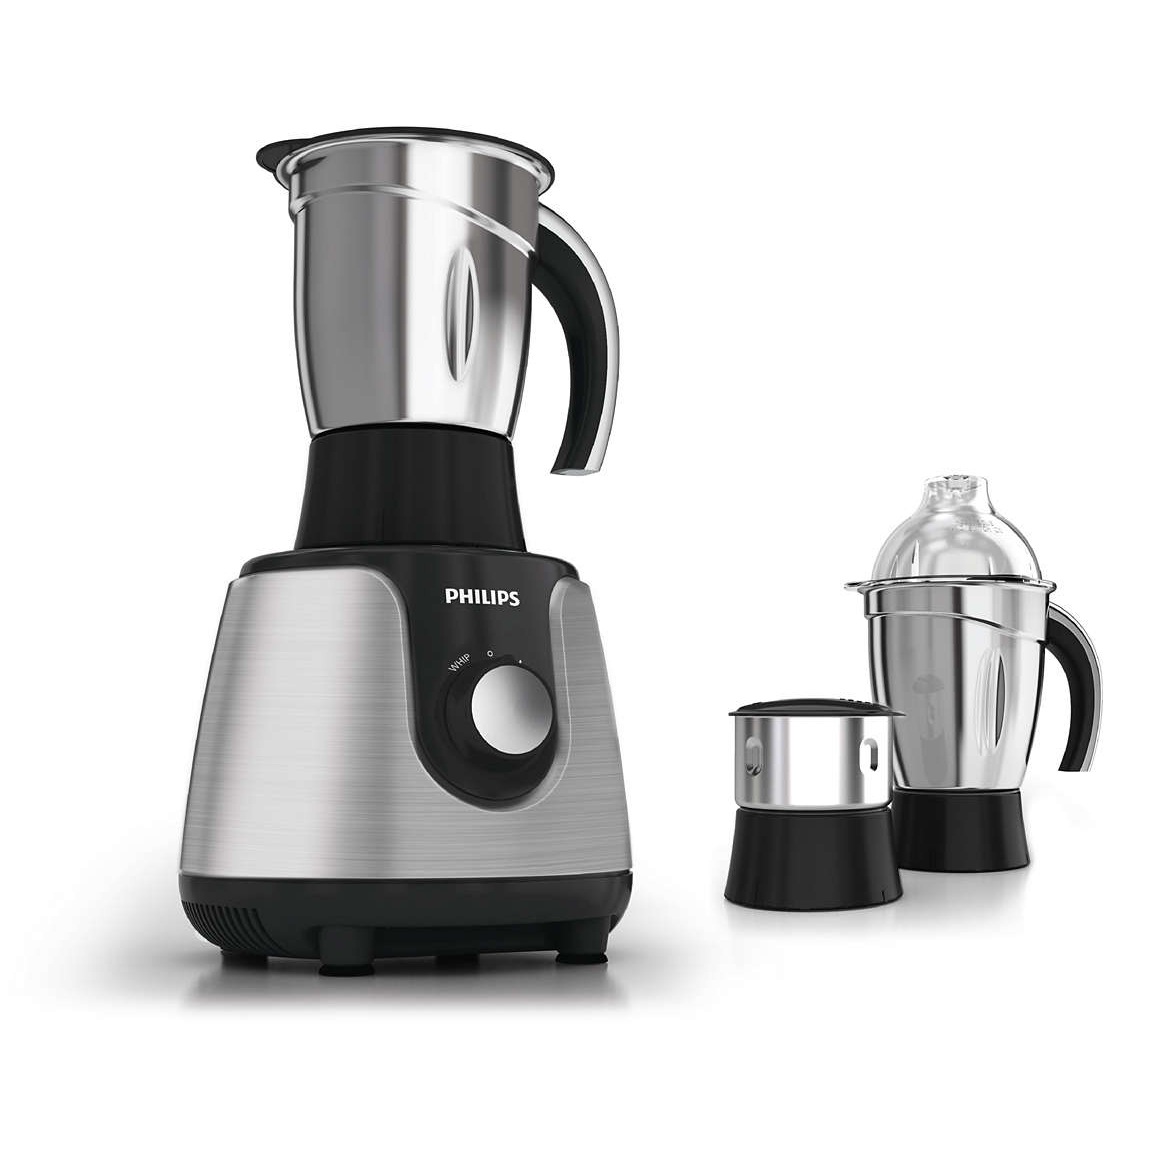 Philips HL7810 00 3 Jar Mixer Grinder Price, Specification & Features| Mixer on Sulekha